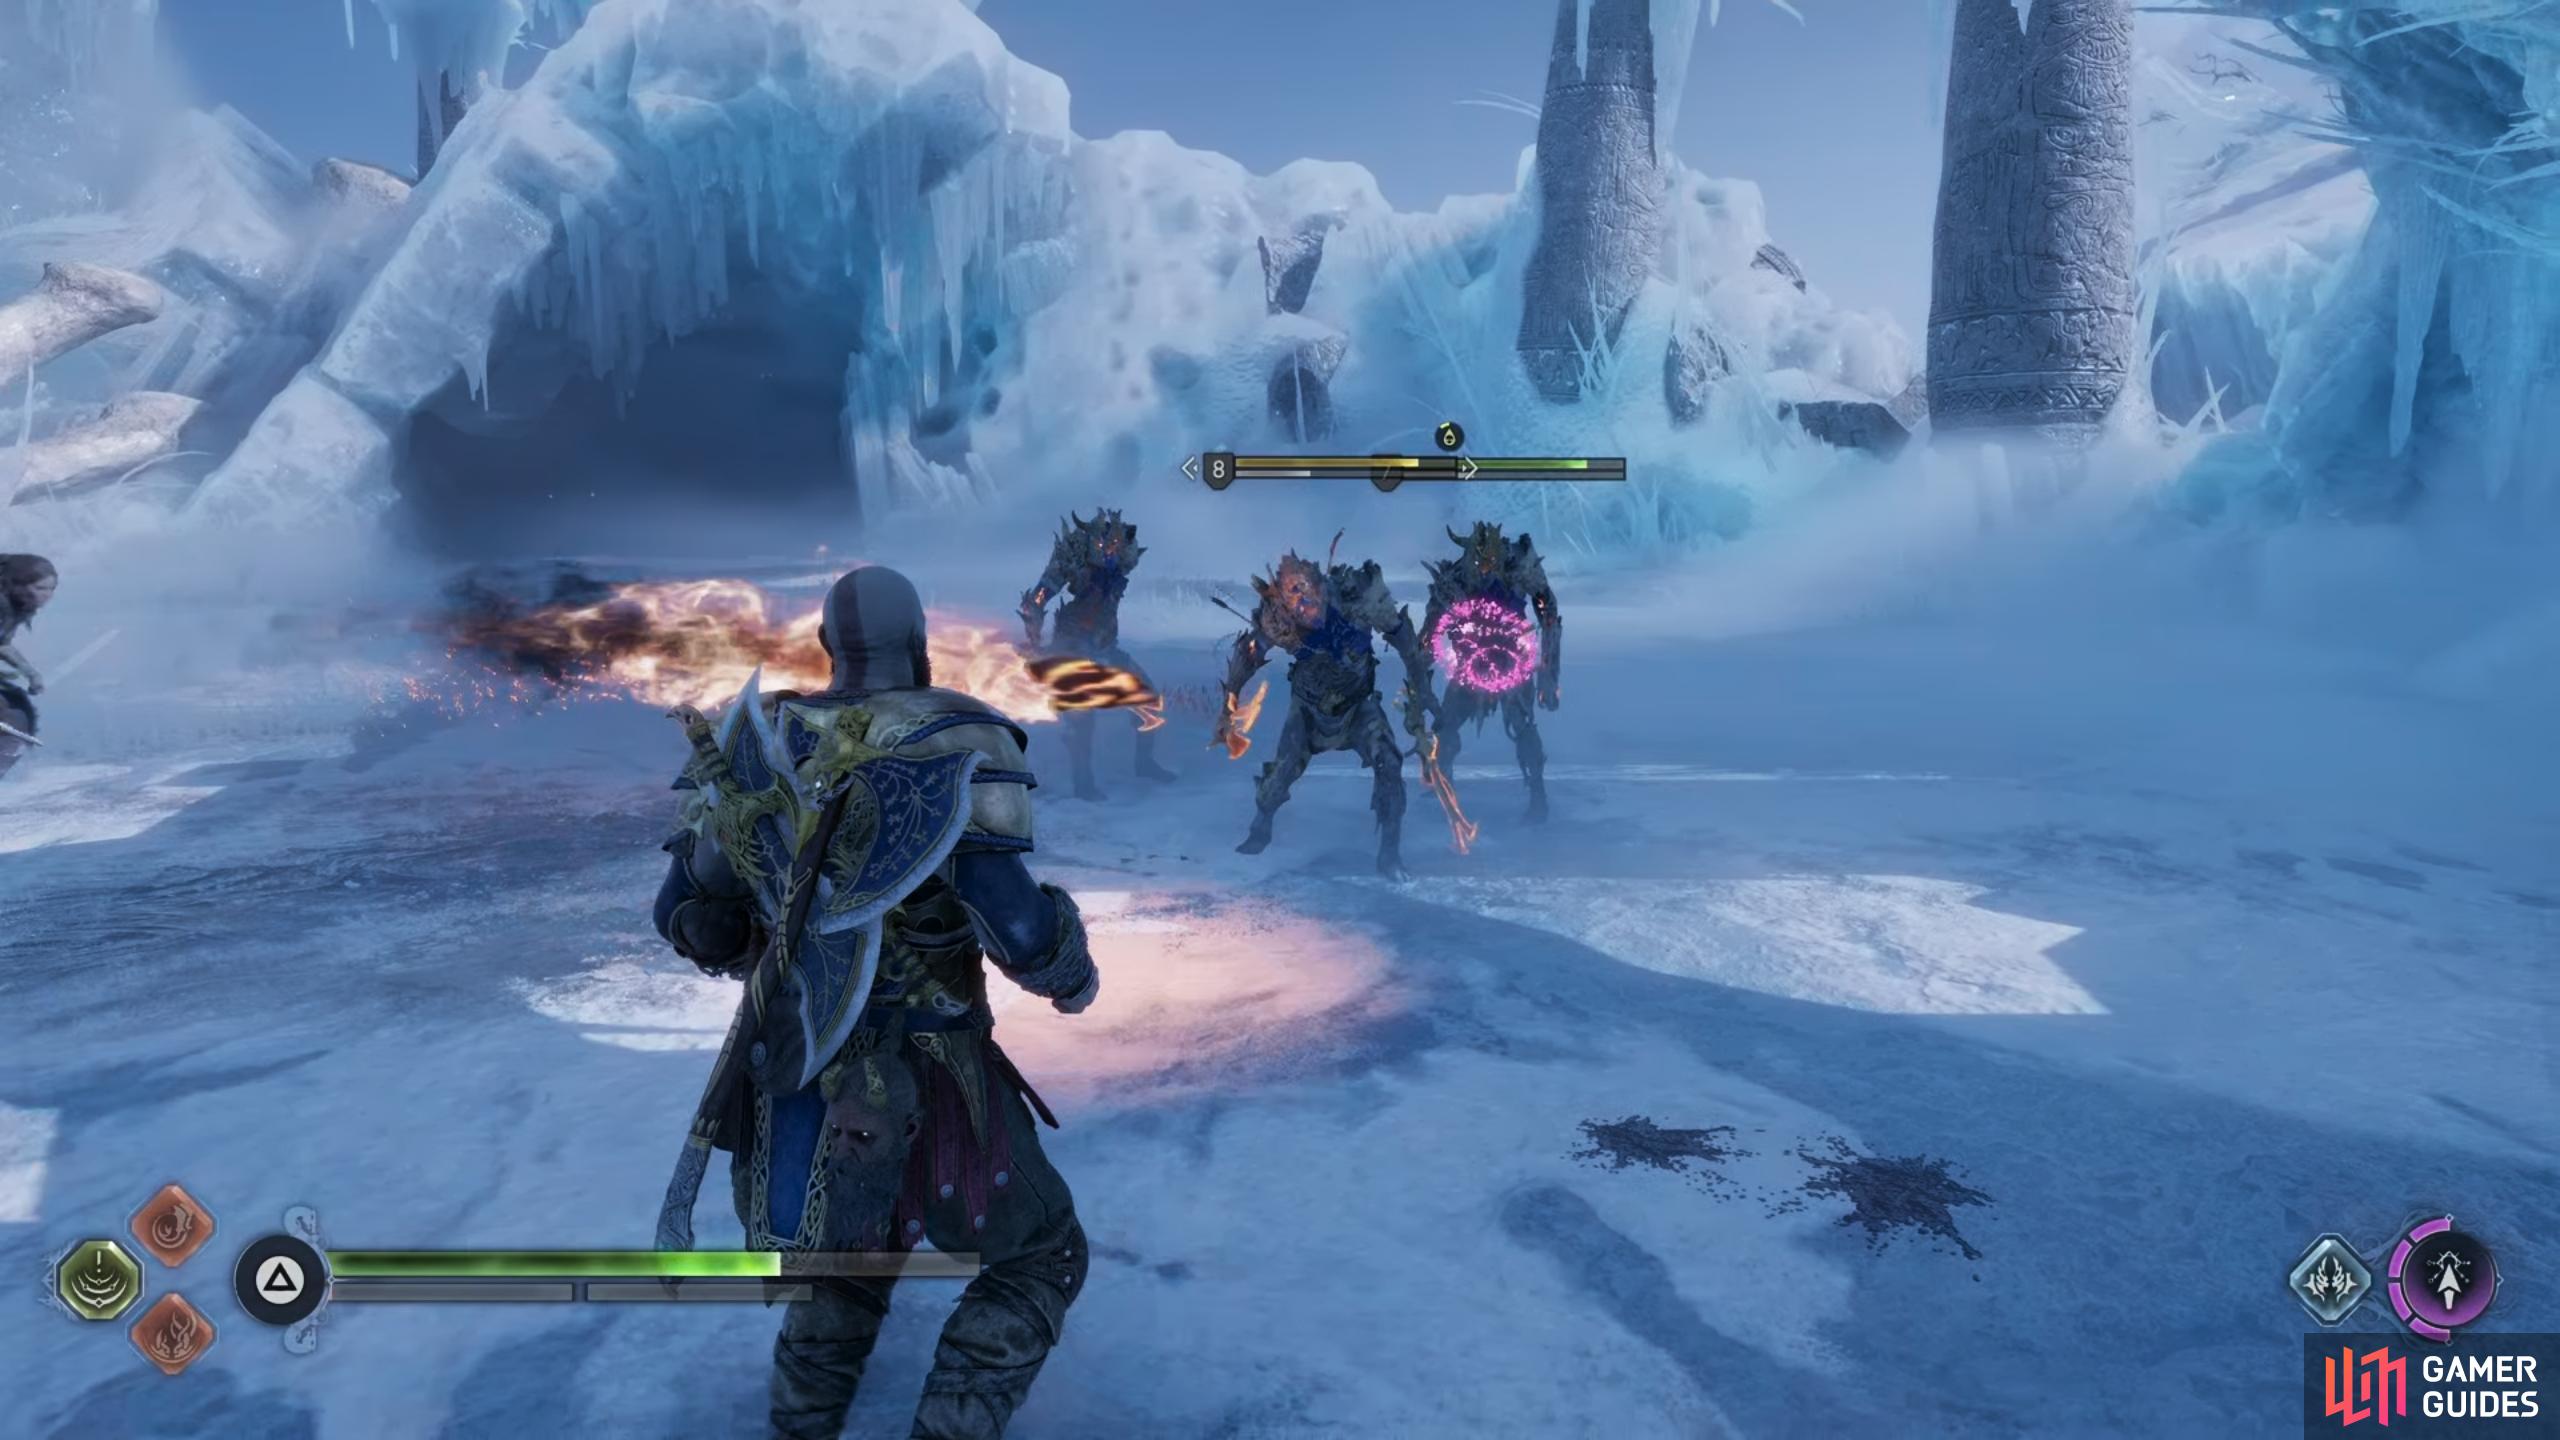 You can parry projectiles just before they hit you and then cast them back at enemies.